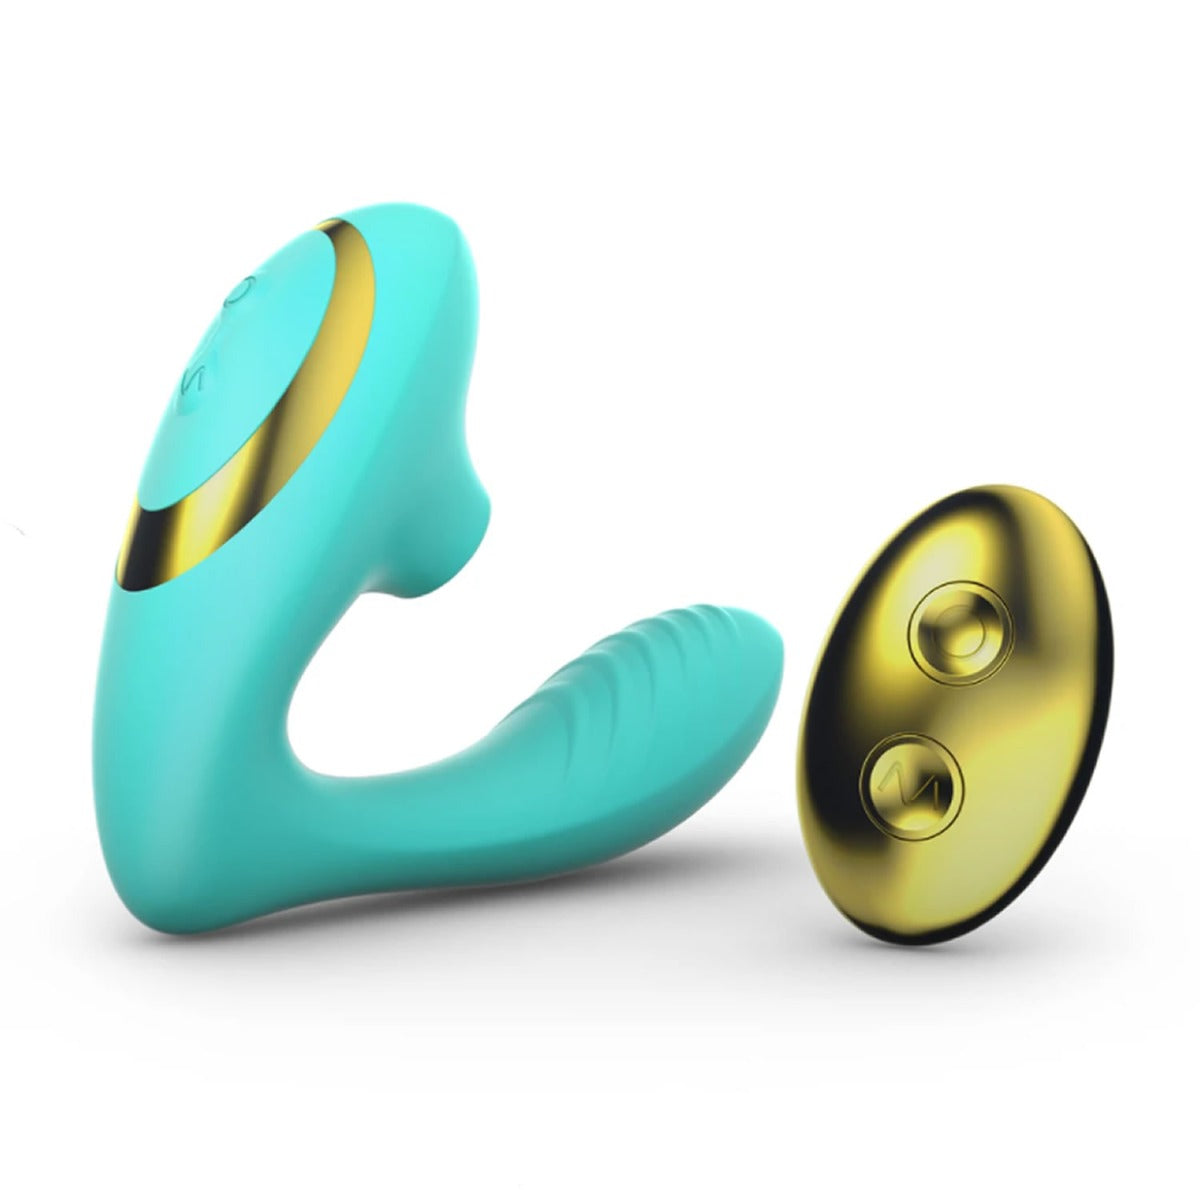 Tracy's Dog | Pro 2 Clitoral Sucking Vibrator - Teal & Gold